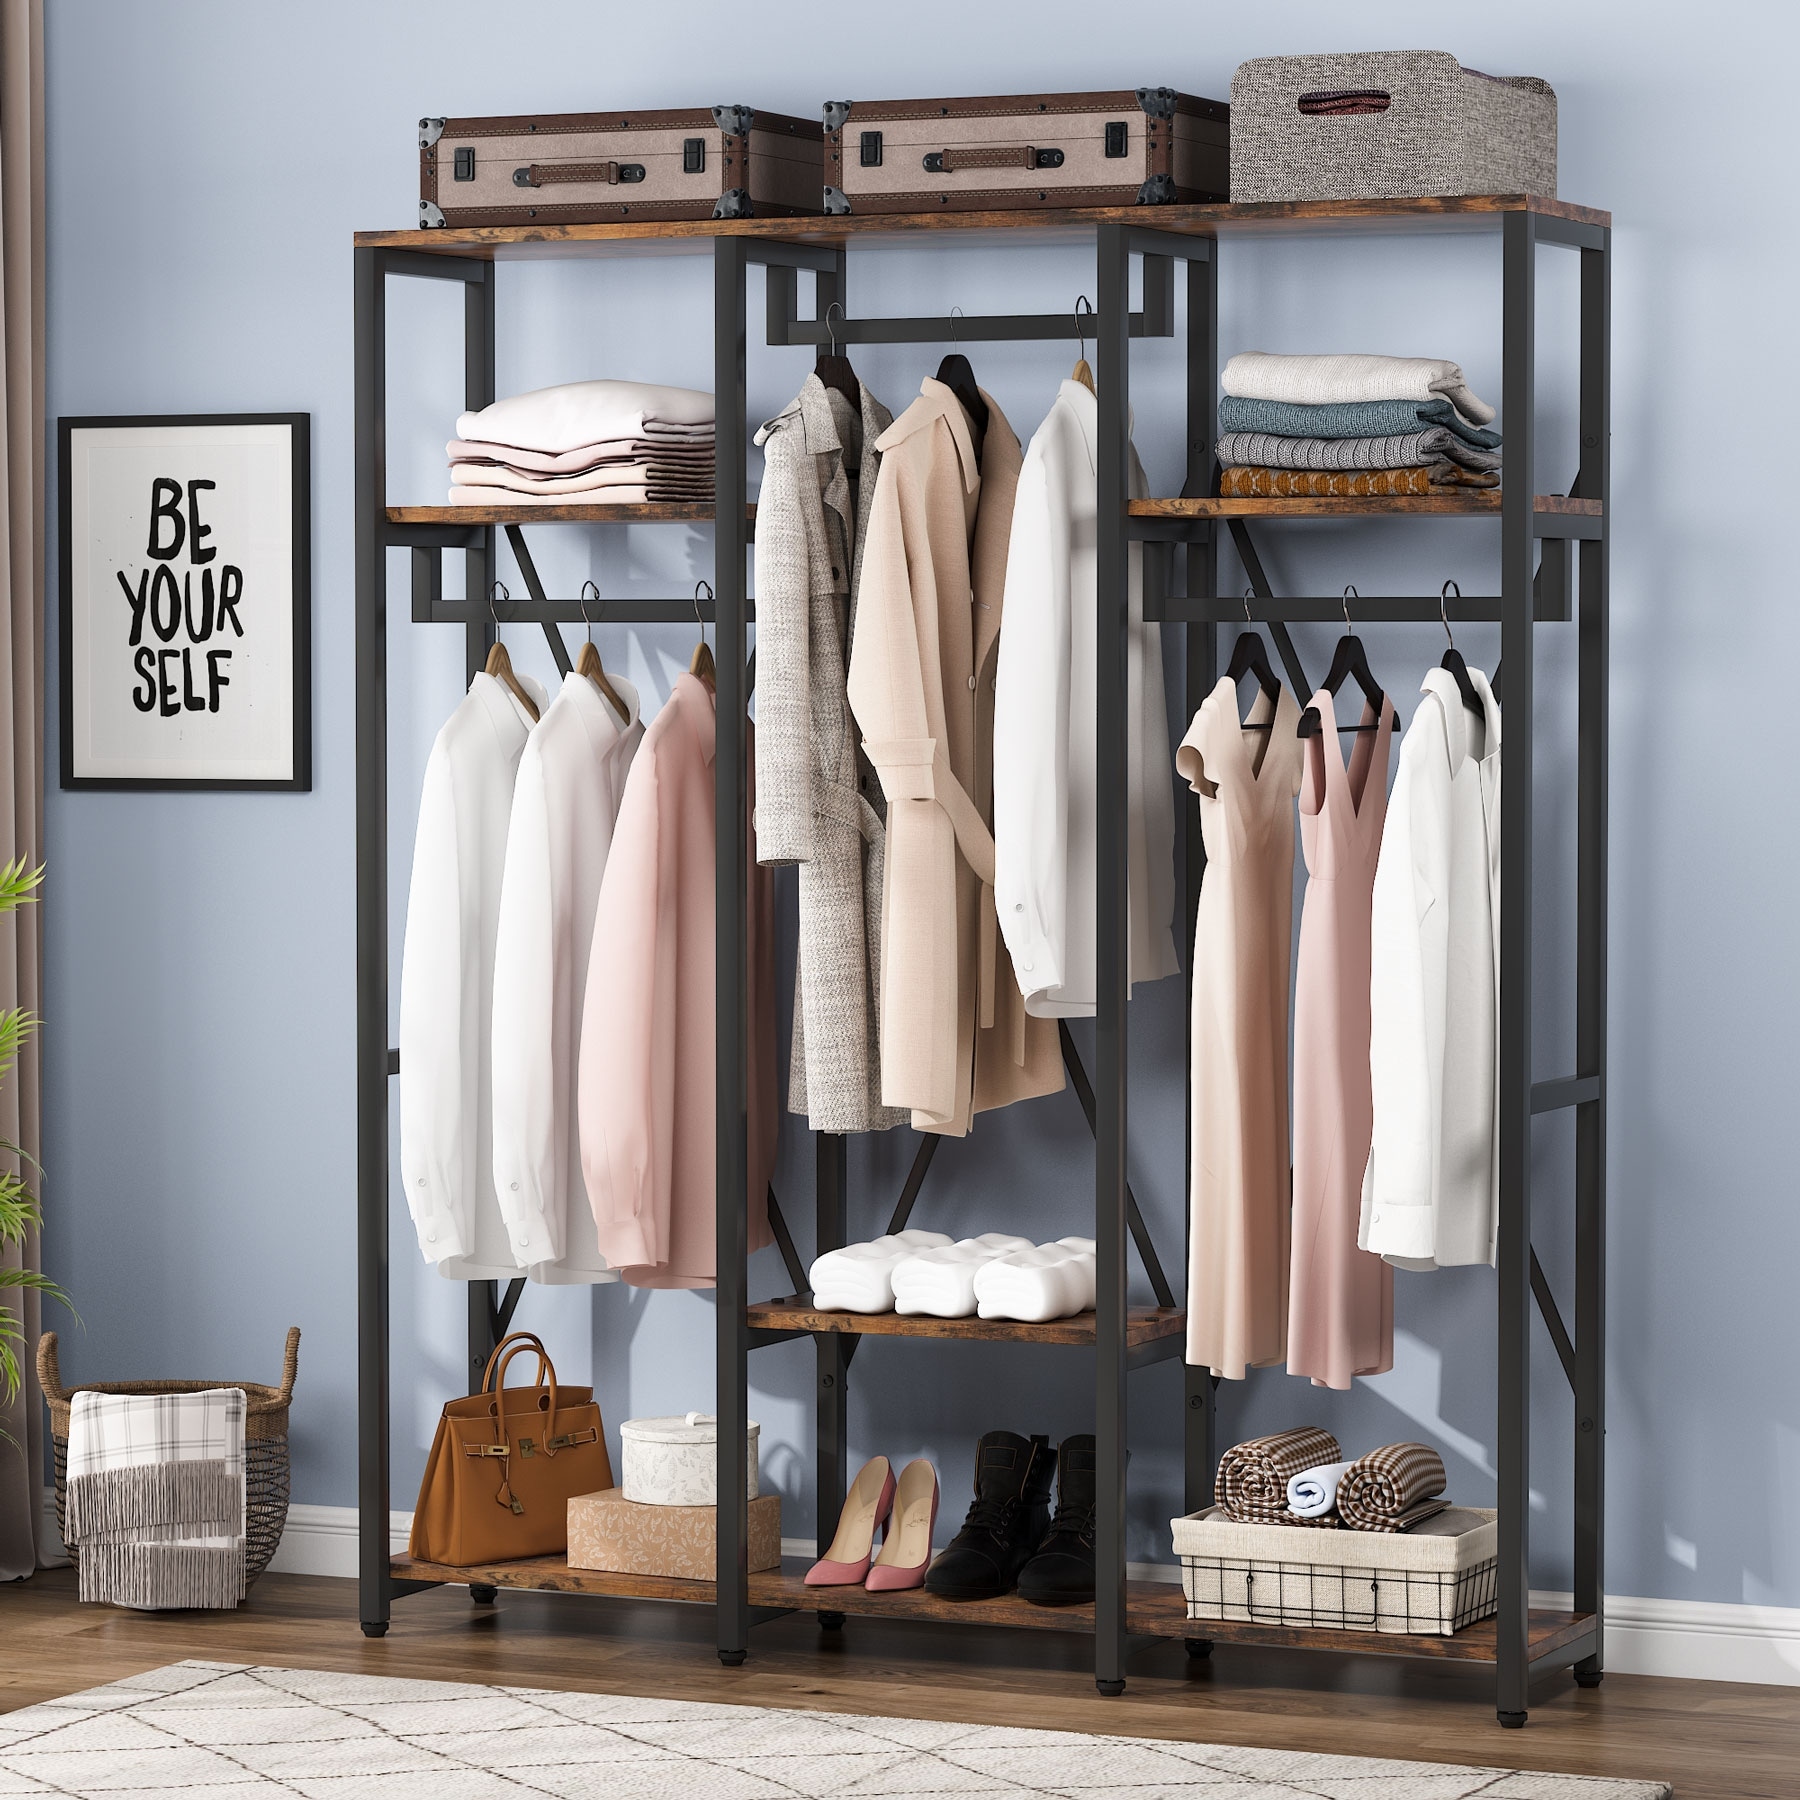 https://ak1.ostkcdn.com/images/products/is/images/direct/2b6a13261569ddceabe8d275881e50dc25e04446/Garment-Rack-for-Hanging-Clothes%2C-Heavy-Duty-Freestanding-Closet-Organizer-Systems-with-Shelves.jpg